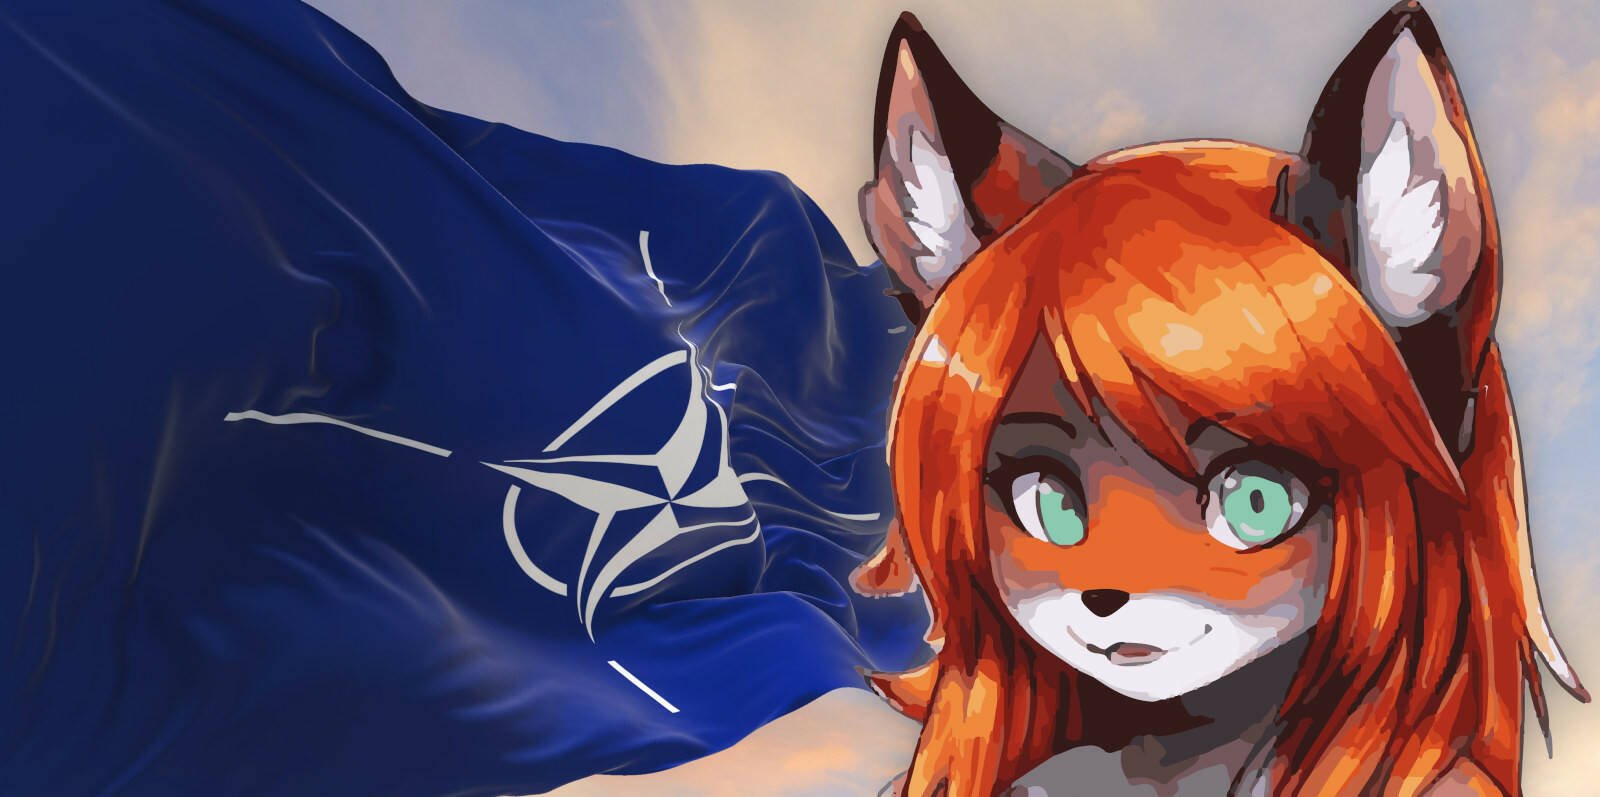 ‘Gay furry hackers’ brag of second NATO break-in, steal and leak more data – Source: go.theregister.com